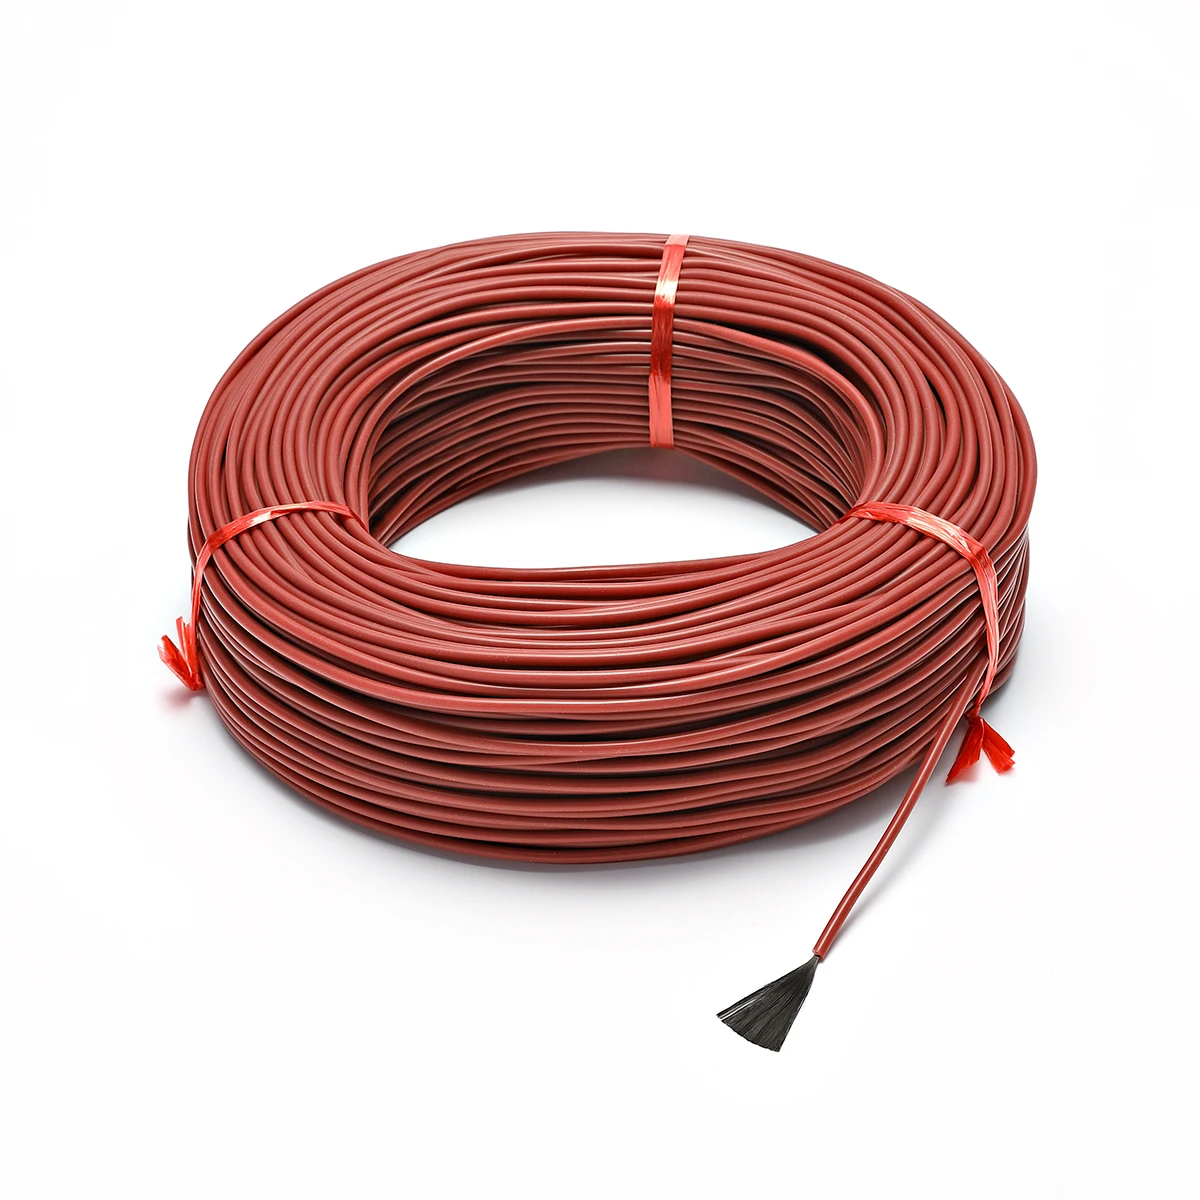 ow cost  rubber 12K 33ohm 5V-220V-300V carbon fiber heating cable flame retardant electro-thermal wire Floor heating line